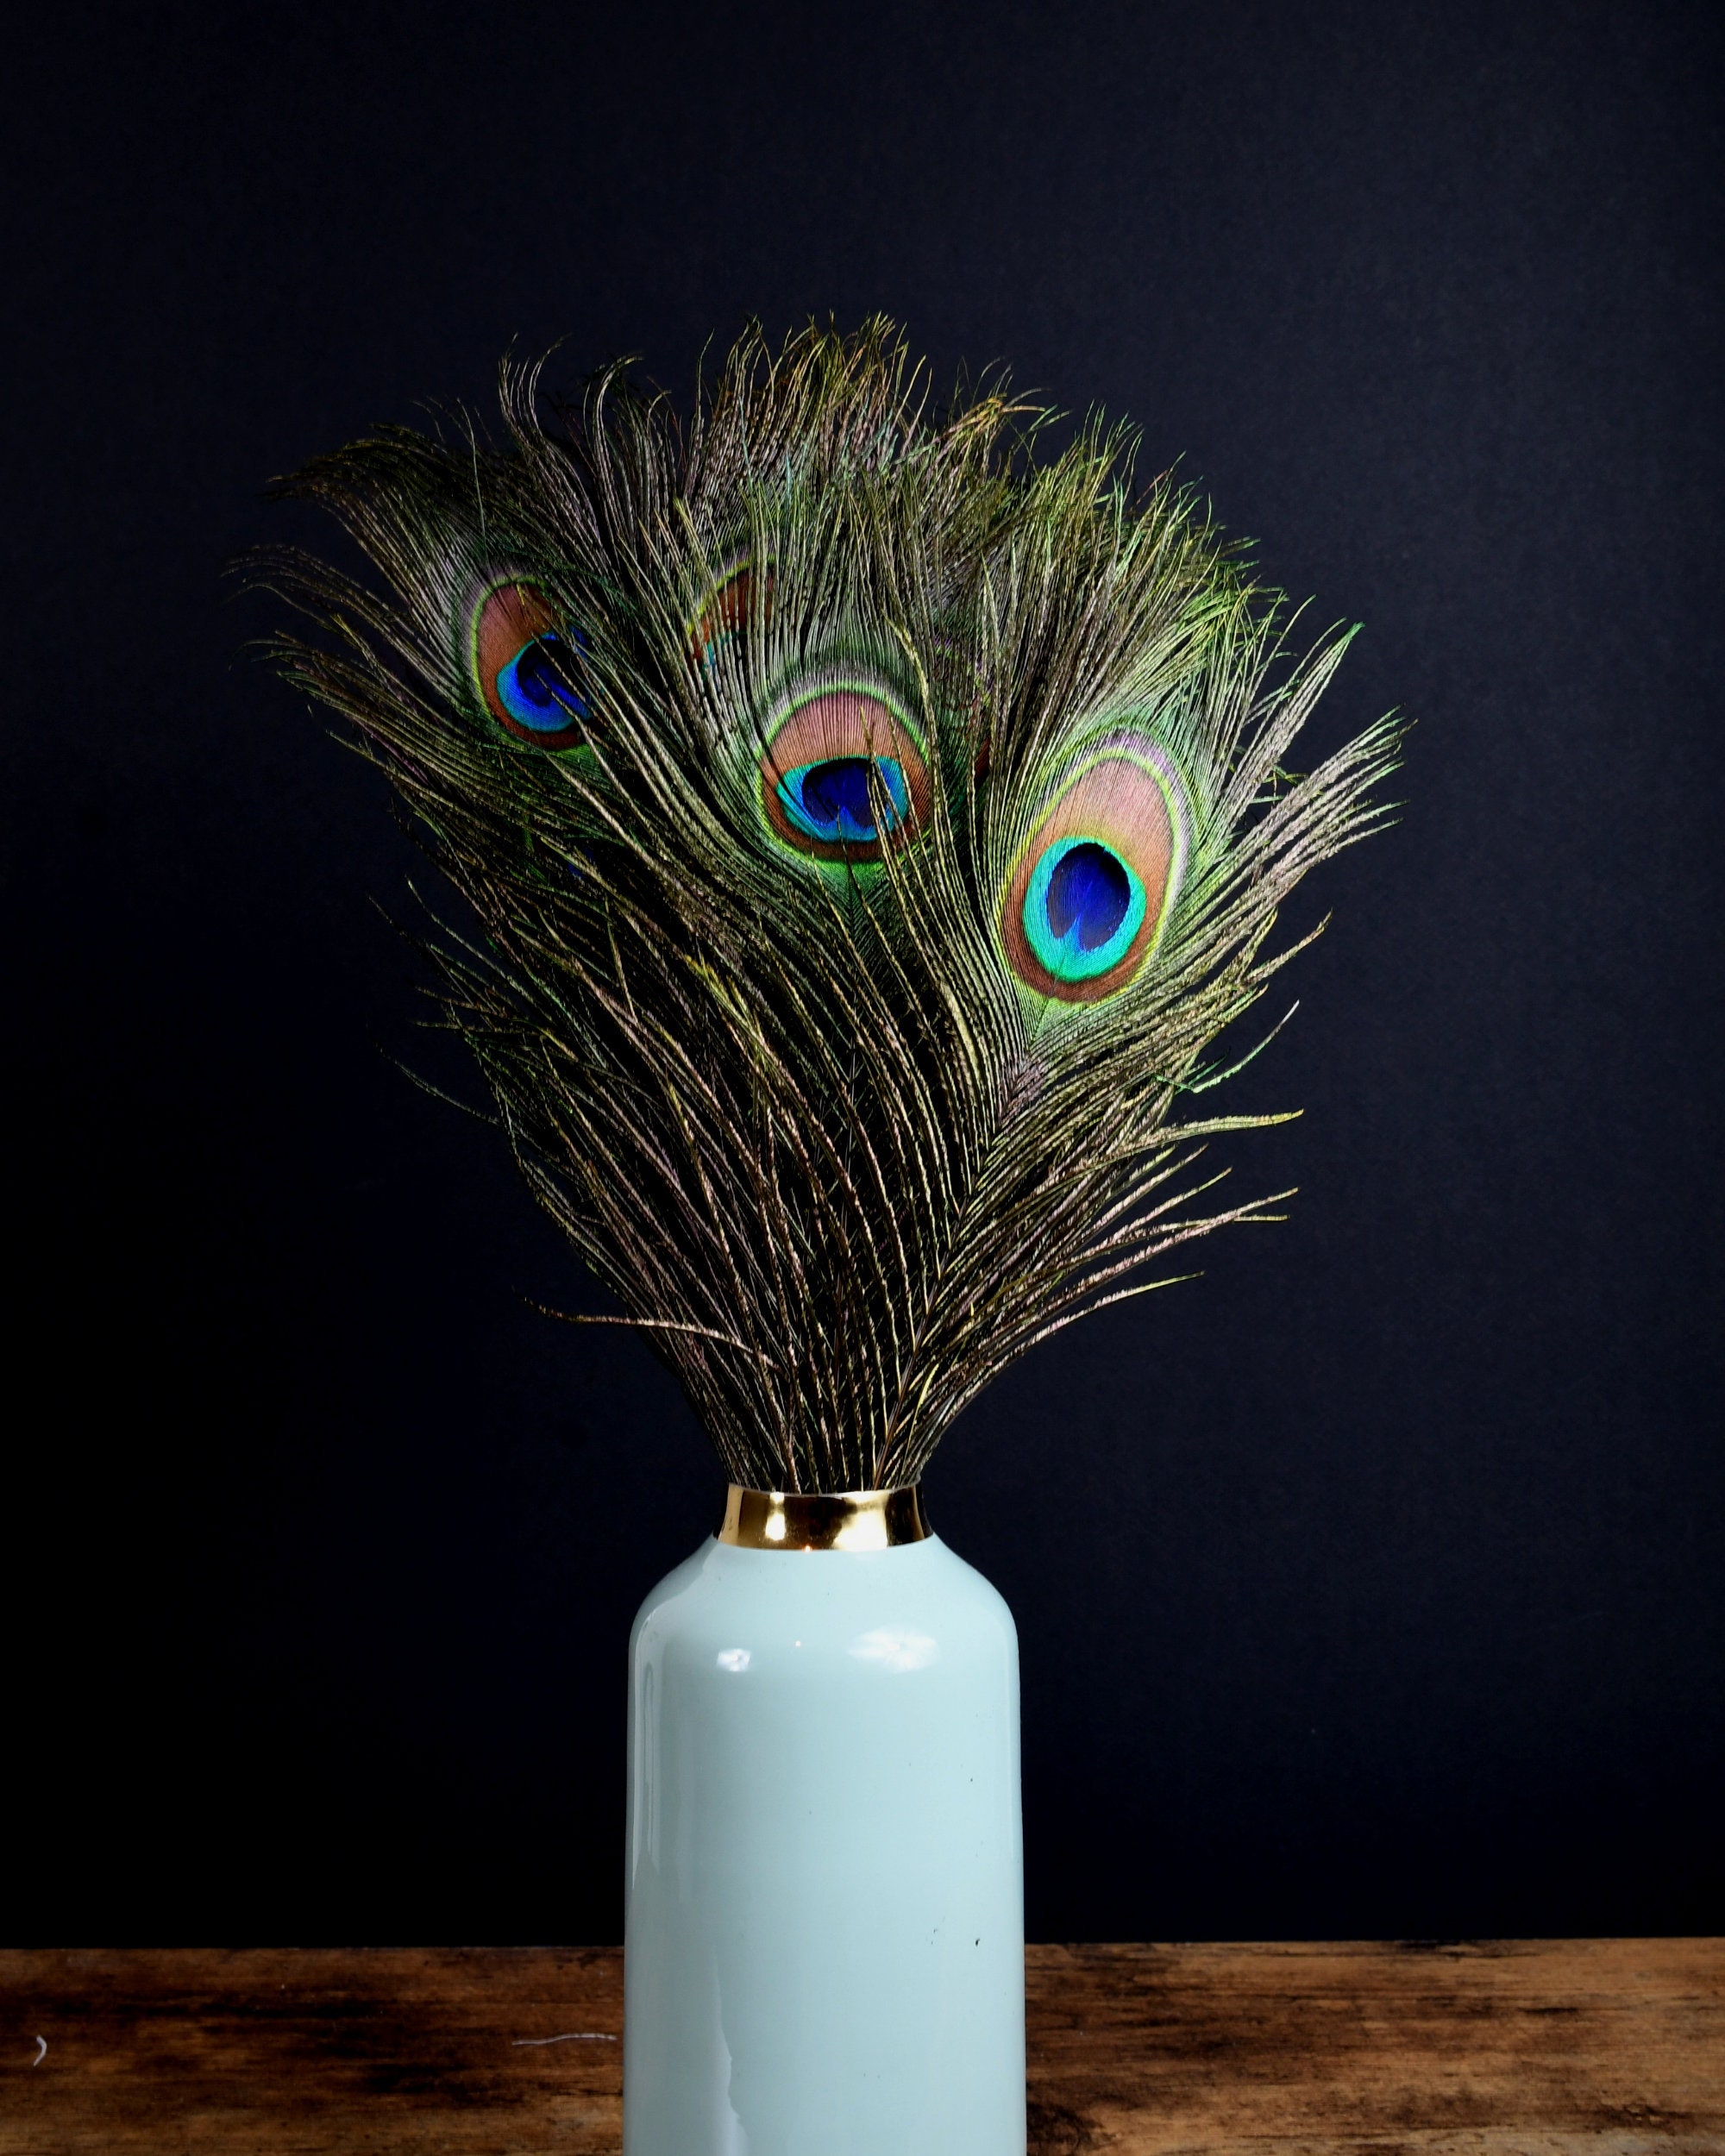 Inspired by Peacock Feathers - National Solutions